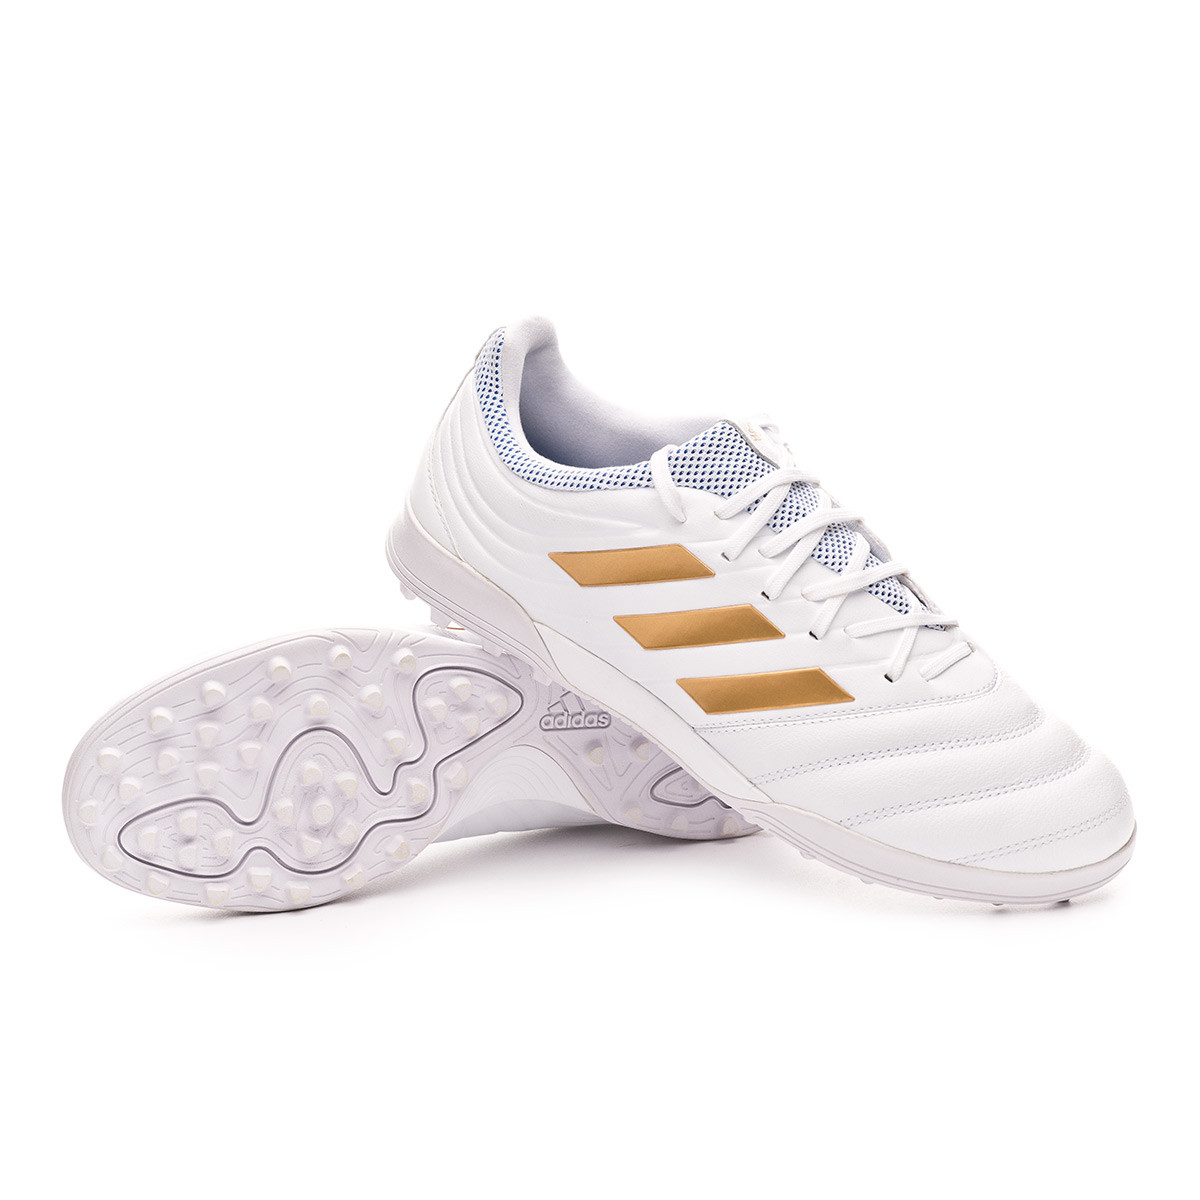 white and gold turf shoes